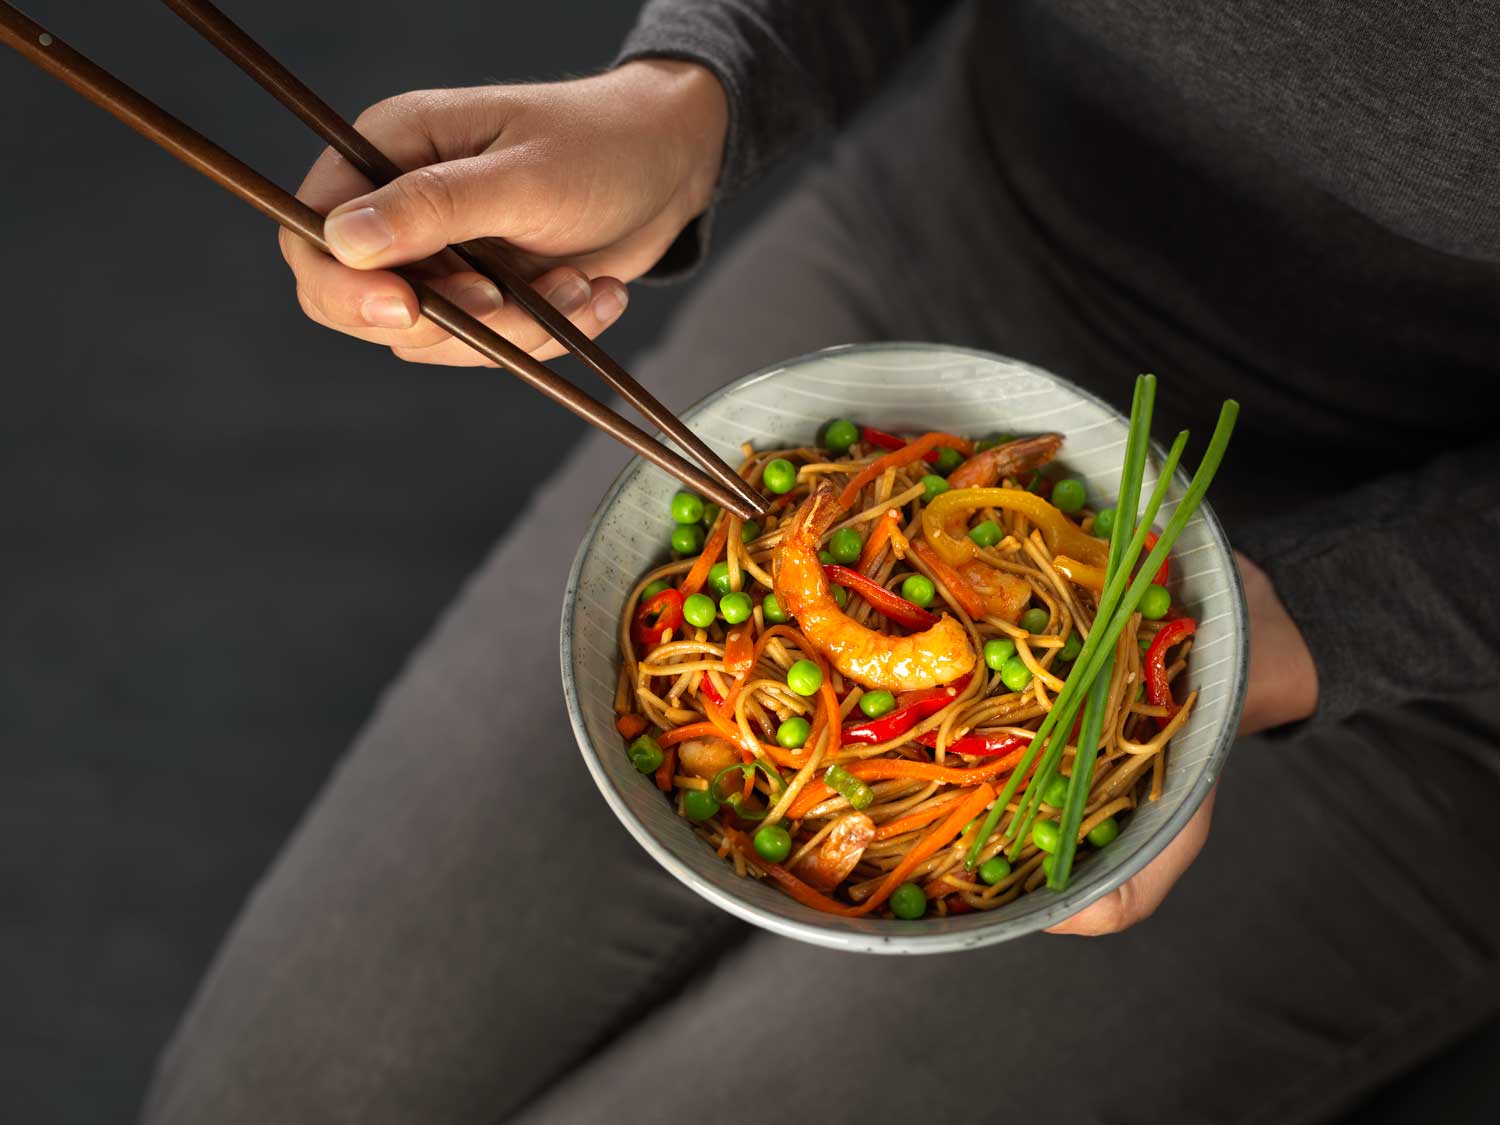 Prawn Stir Fry in a bowl with womans hands holding chopsticks 